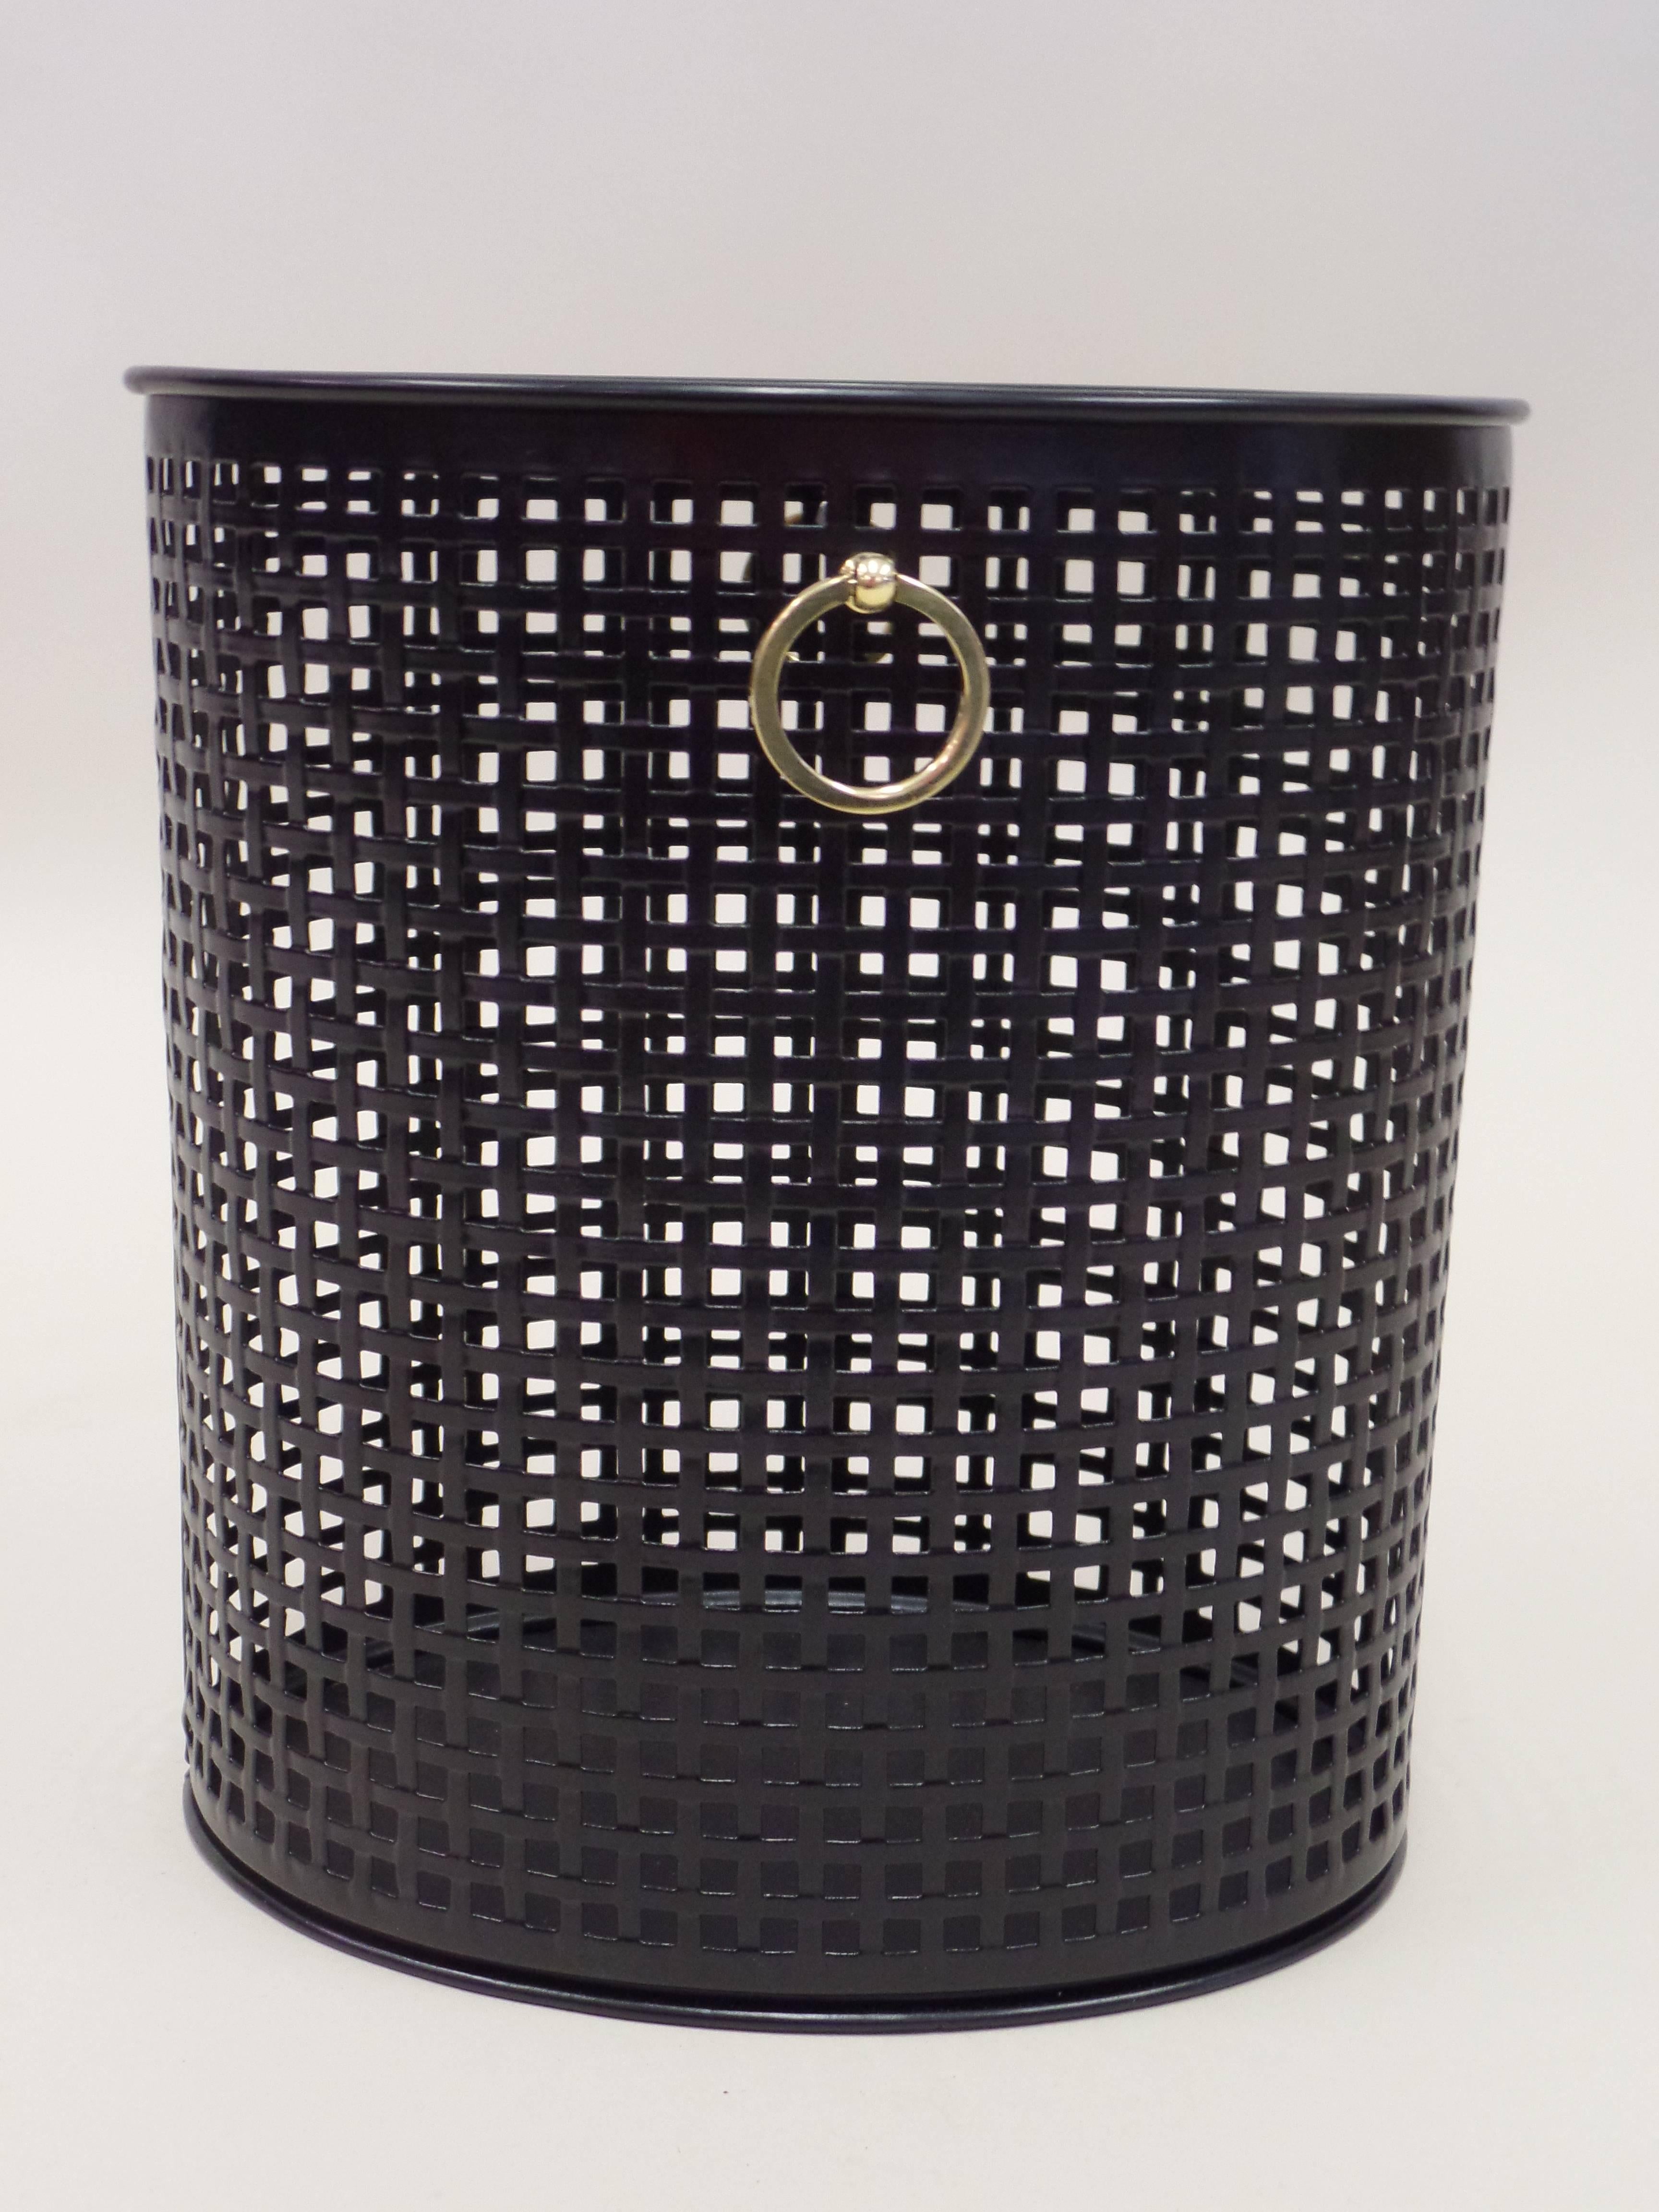 Elegant and timeless French Mid-Century Modern Neoclassical Wastebasket Attributed to Jacques Adnet. 

The piece is oval in form and the structure is composed of small square forms that form a repetitive Minimalist grid pattern. It is in black